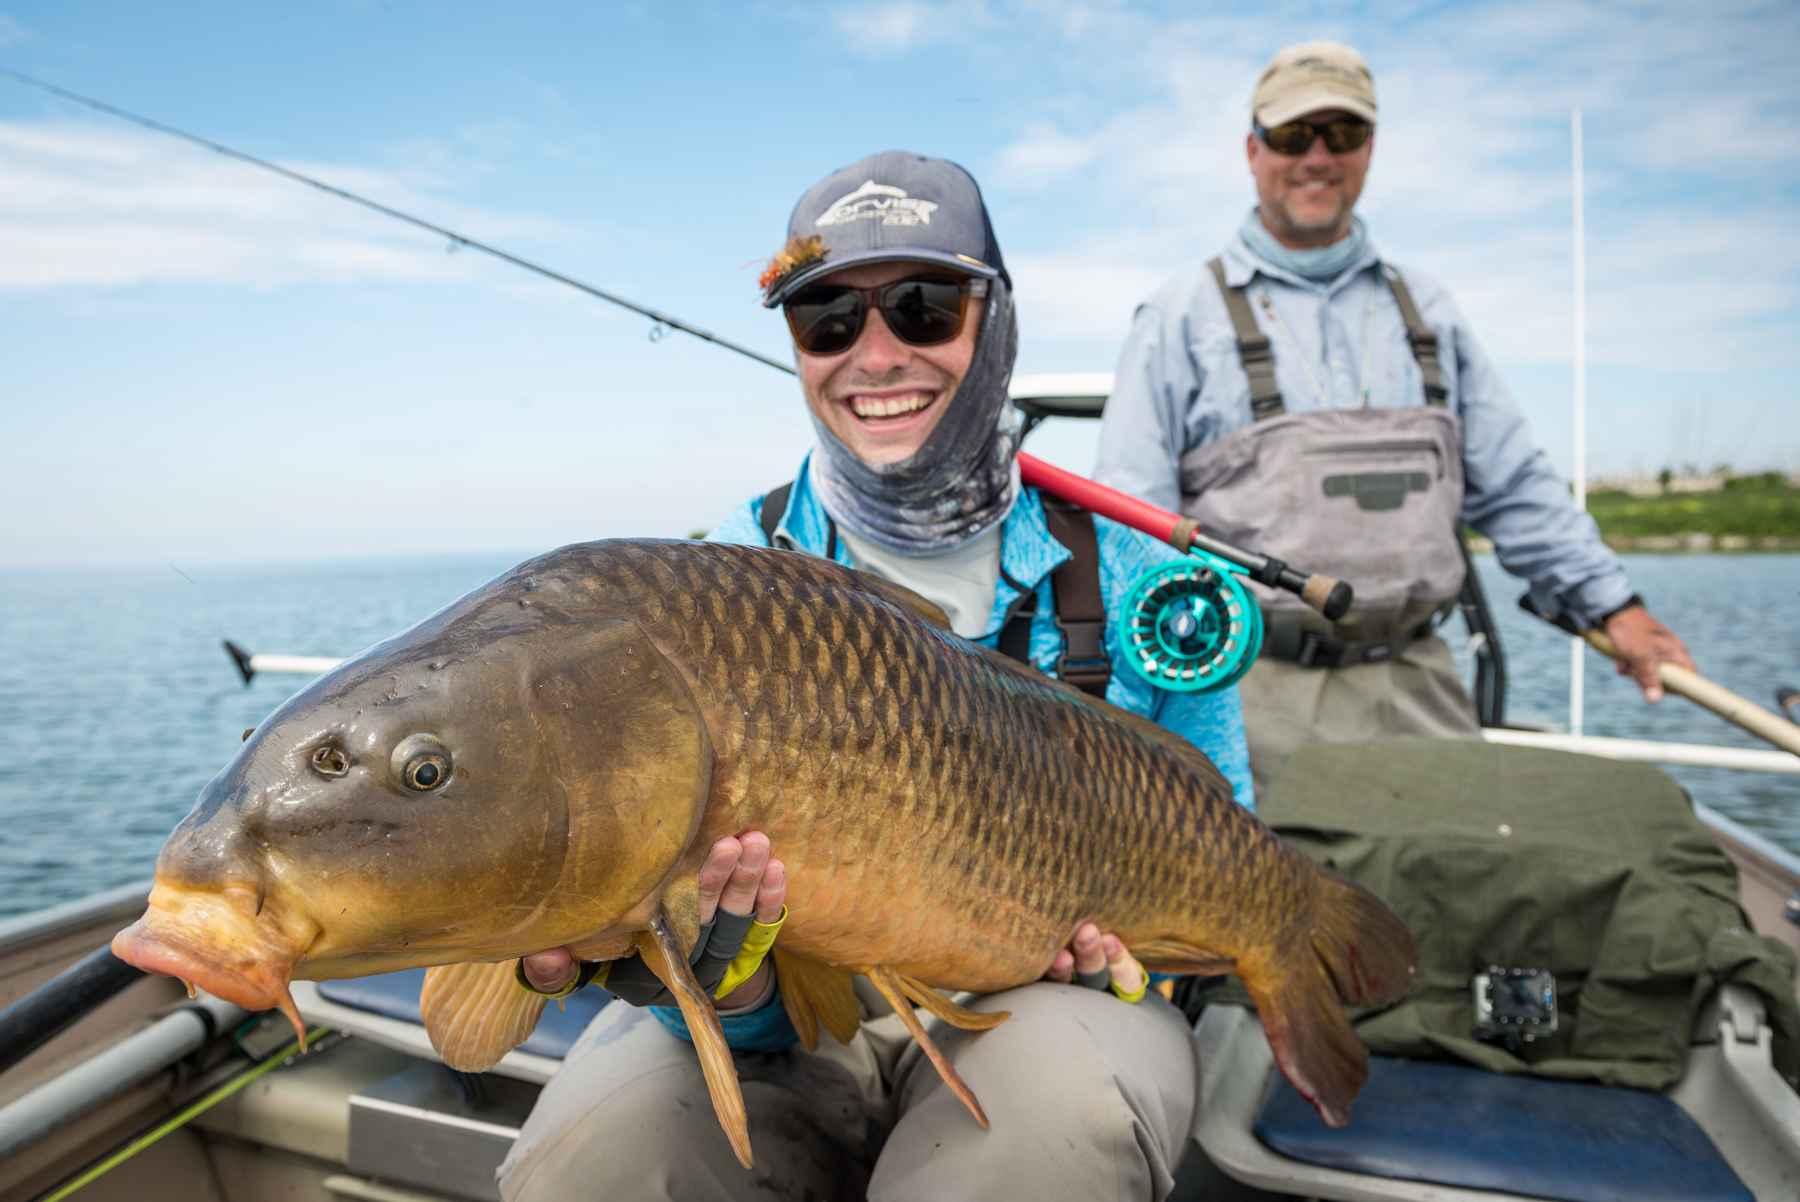 4 More Tips on Fly Fishing for Carp